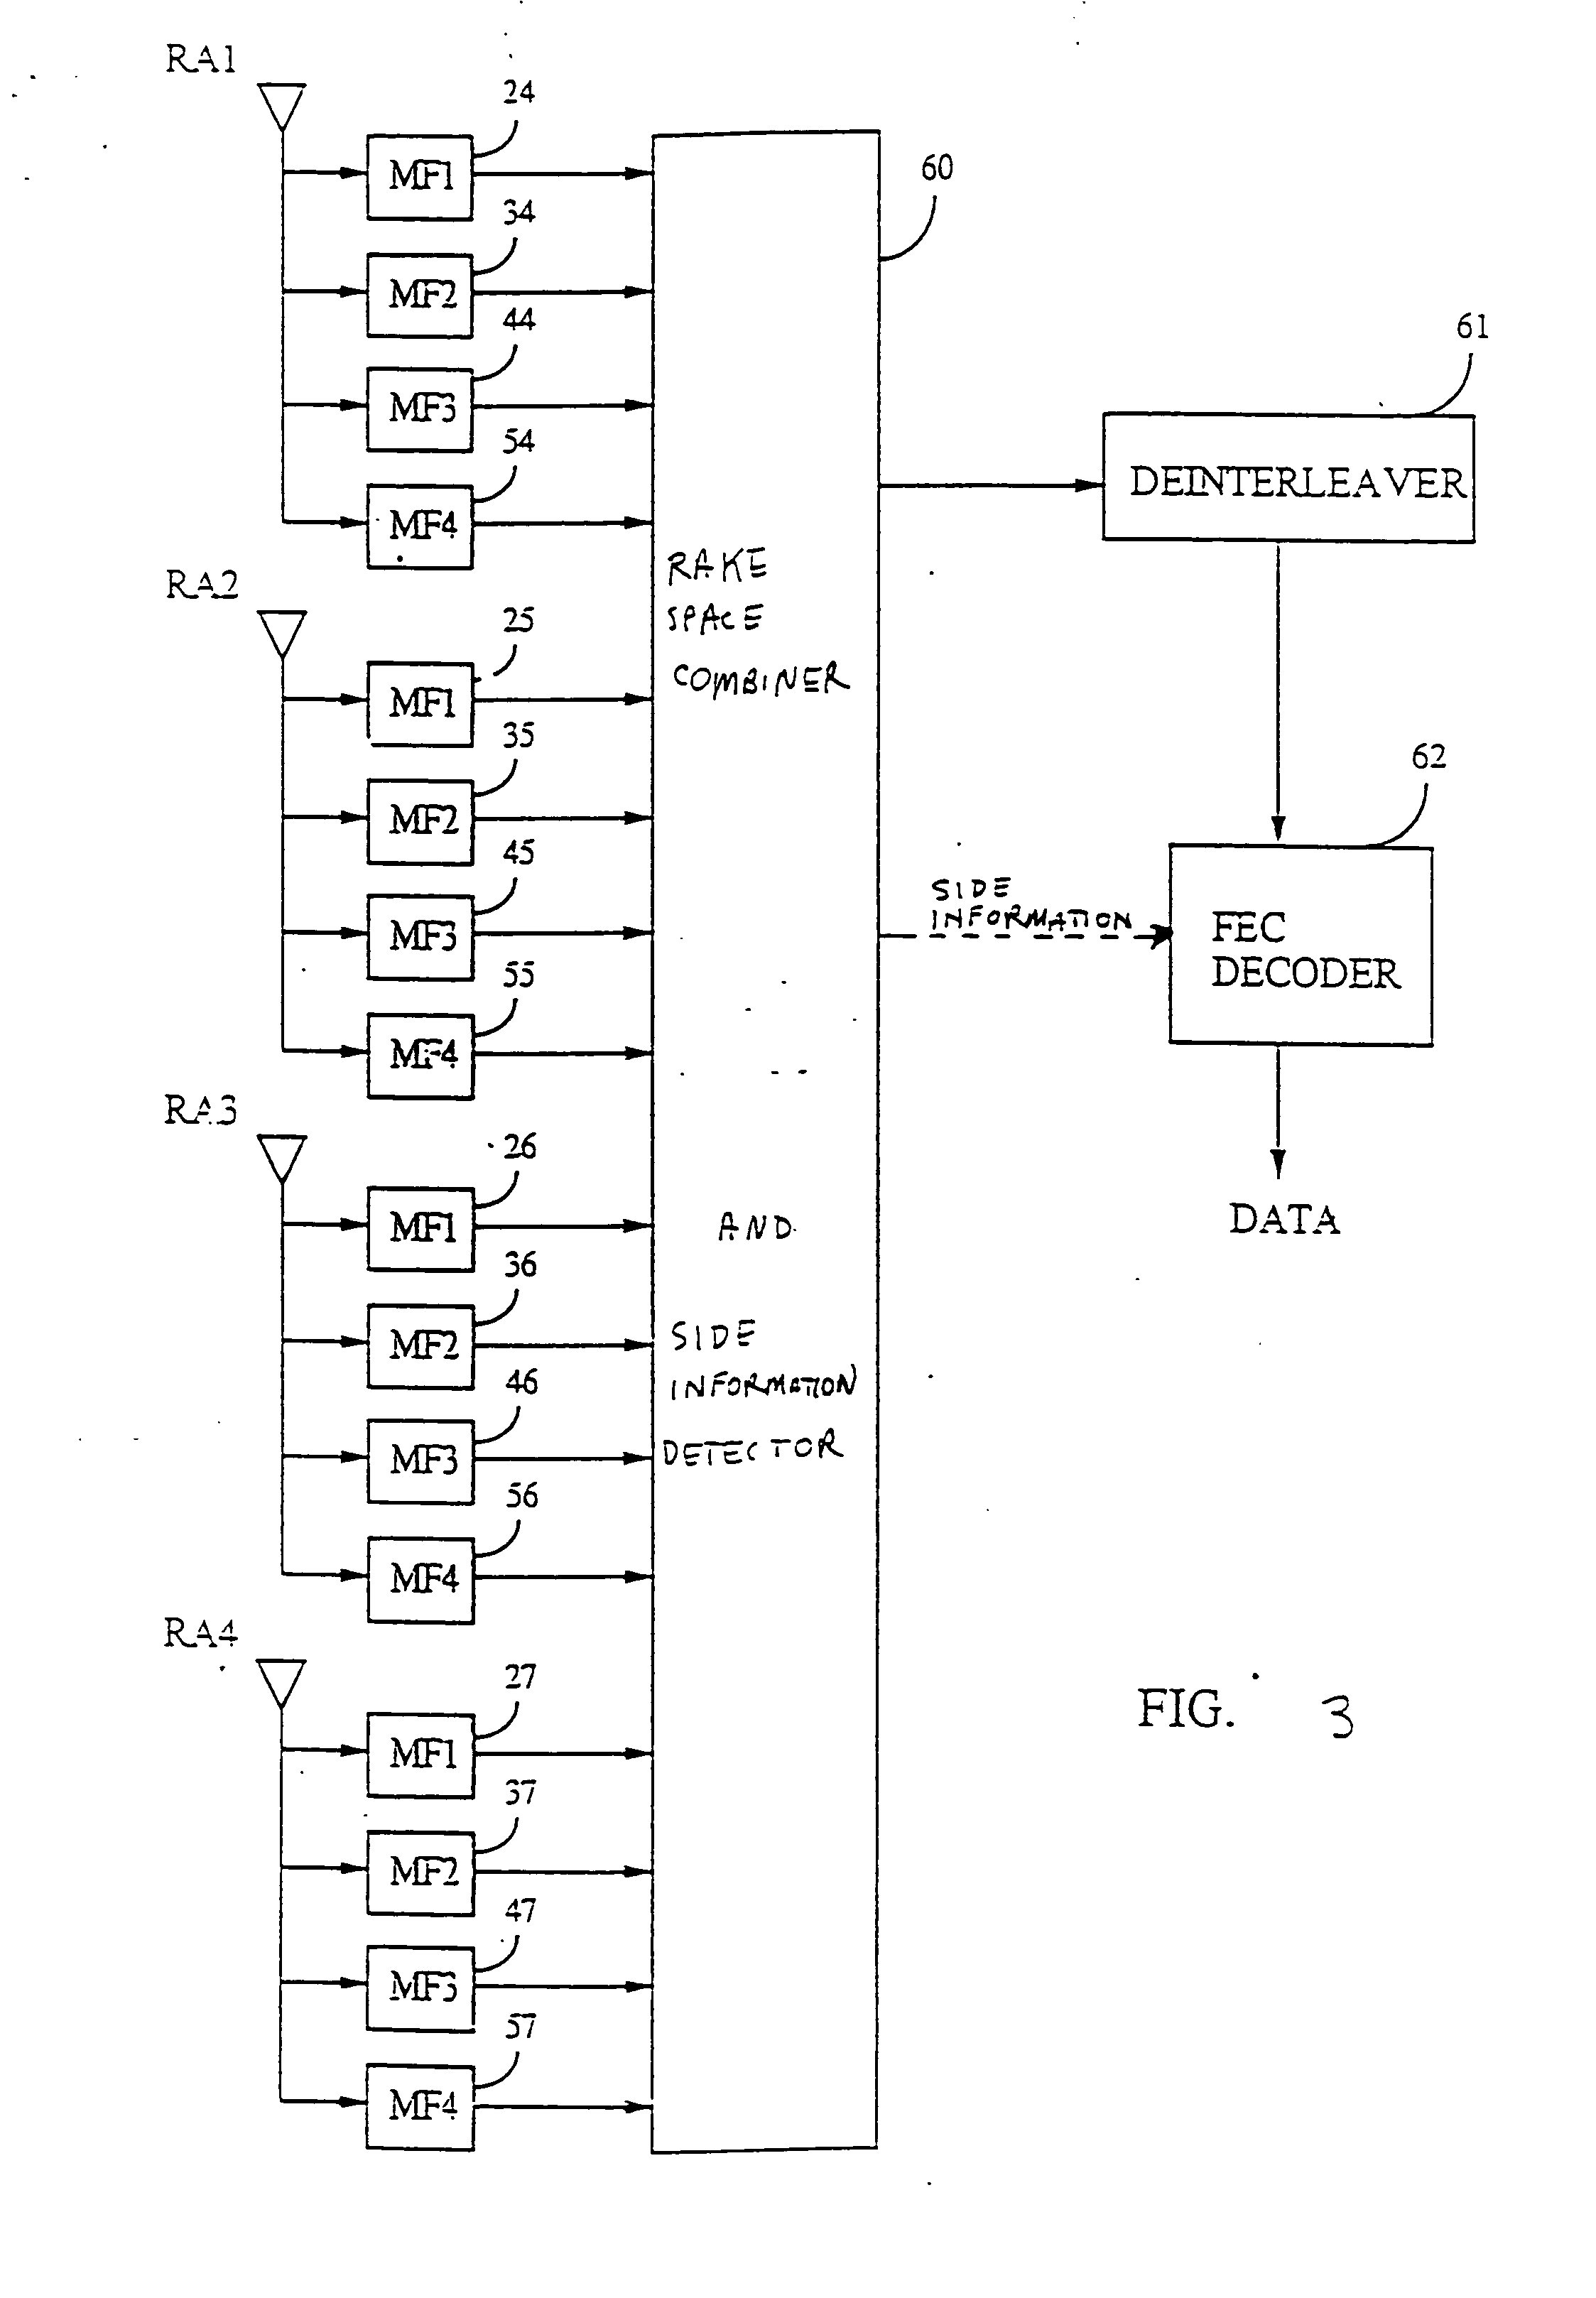 Multiple-input multiple-output (MIMO) spread-spectrum system and method